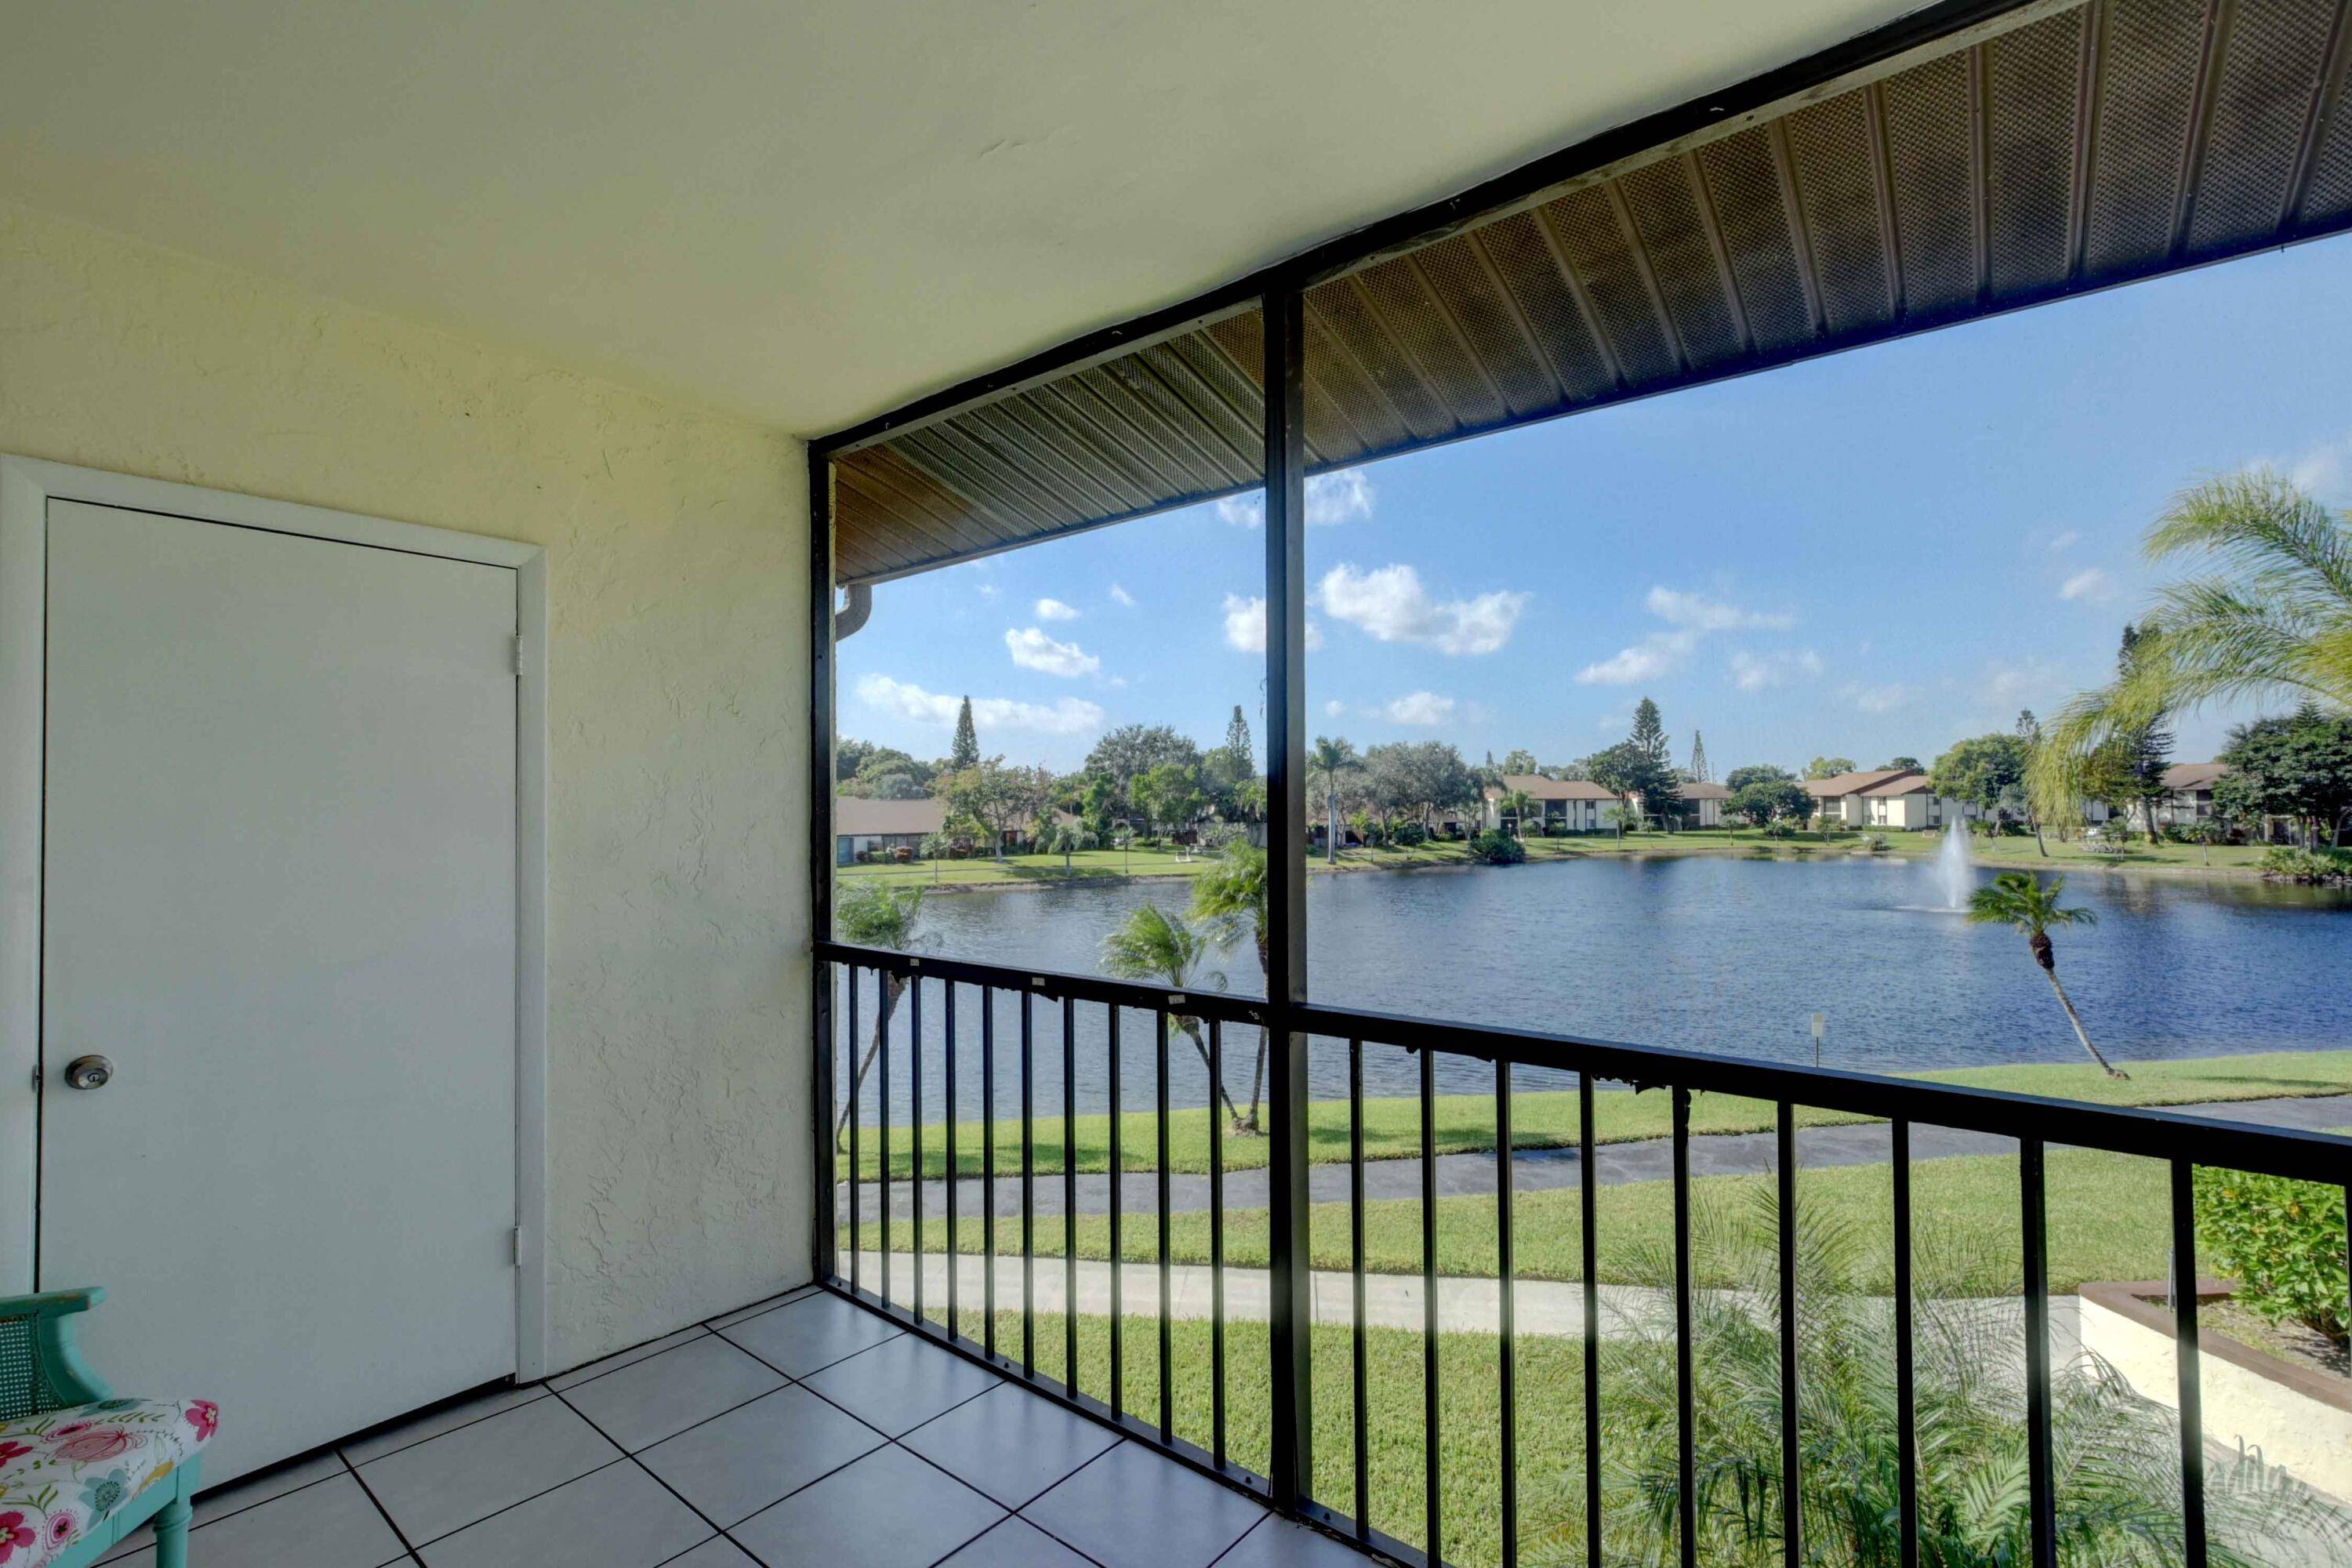 Fair priced charming unit overlooking the lake, close to the Club House, the pool and the entrance to the gated community.